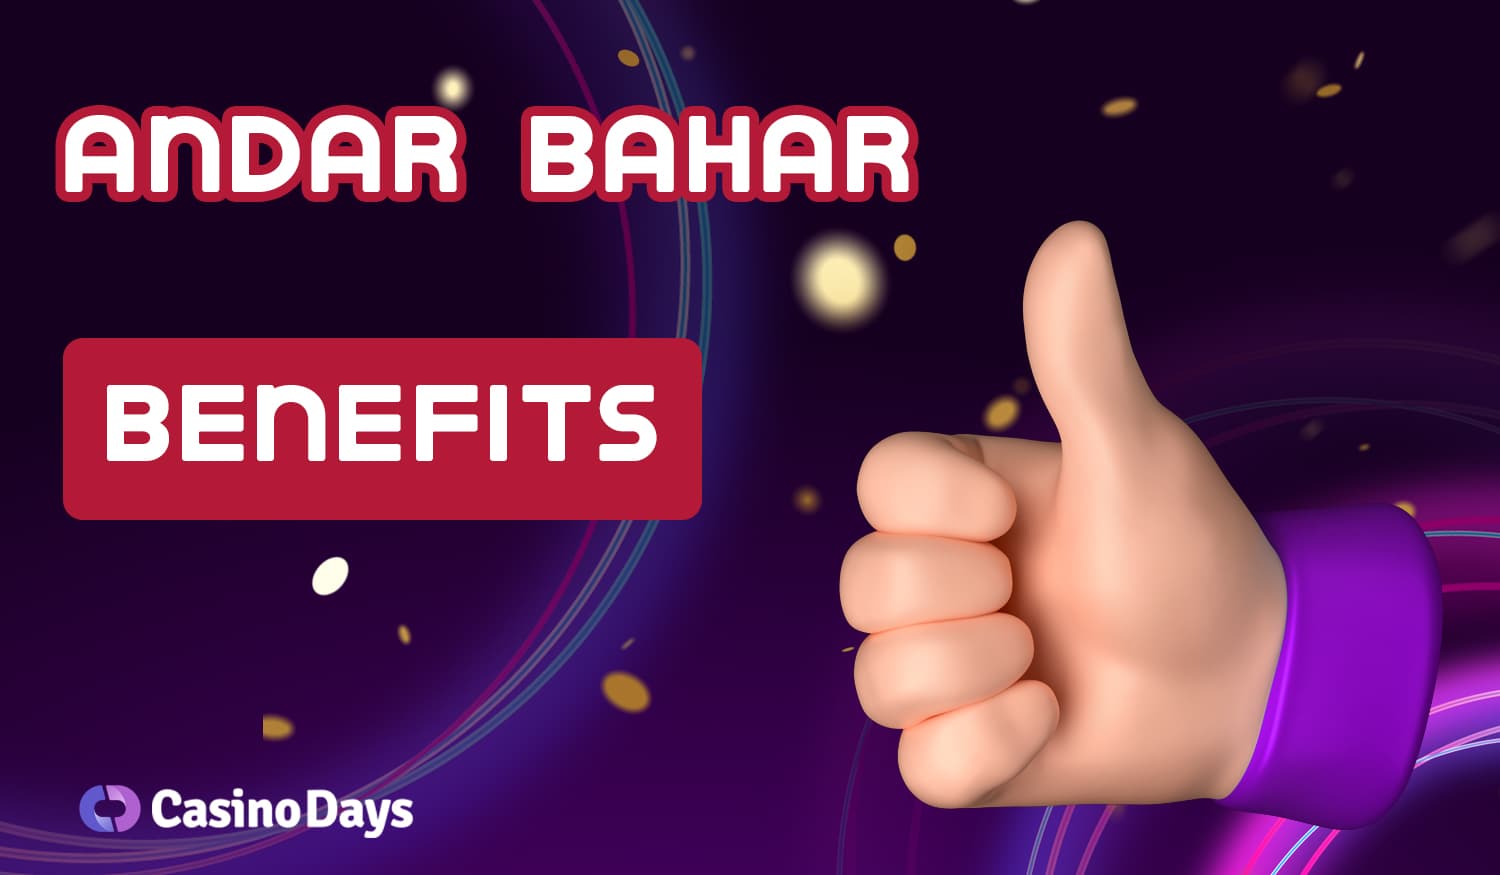 What benefits are available to Casino Days users when playing Andar Bahar